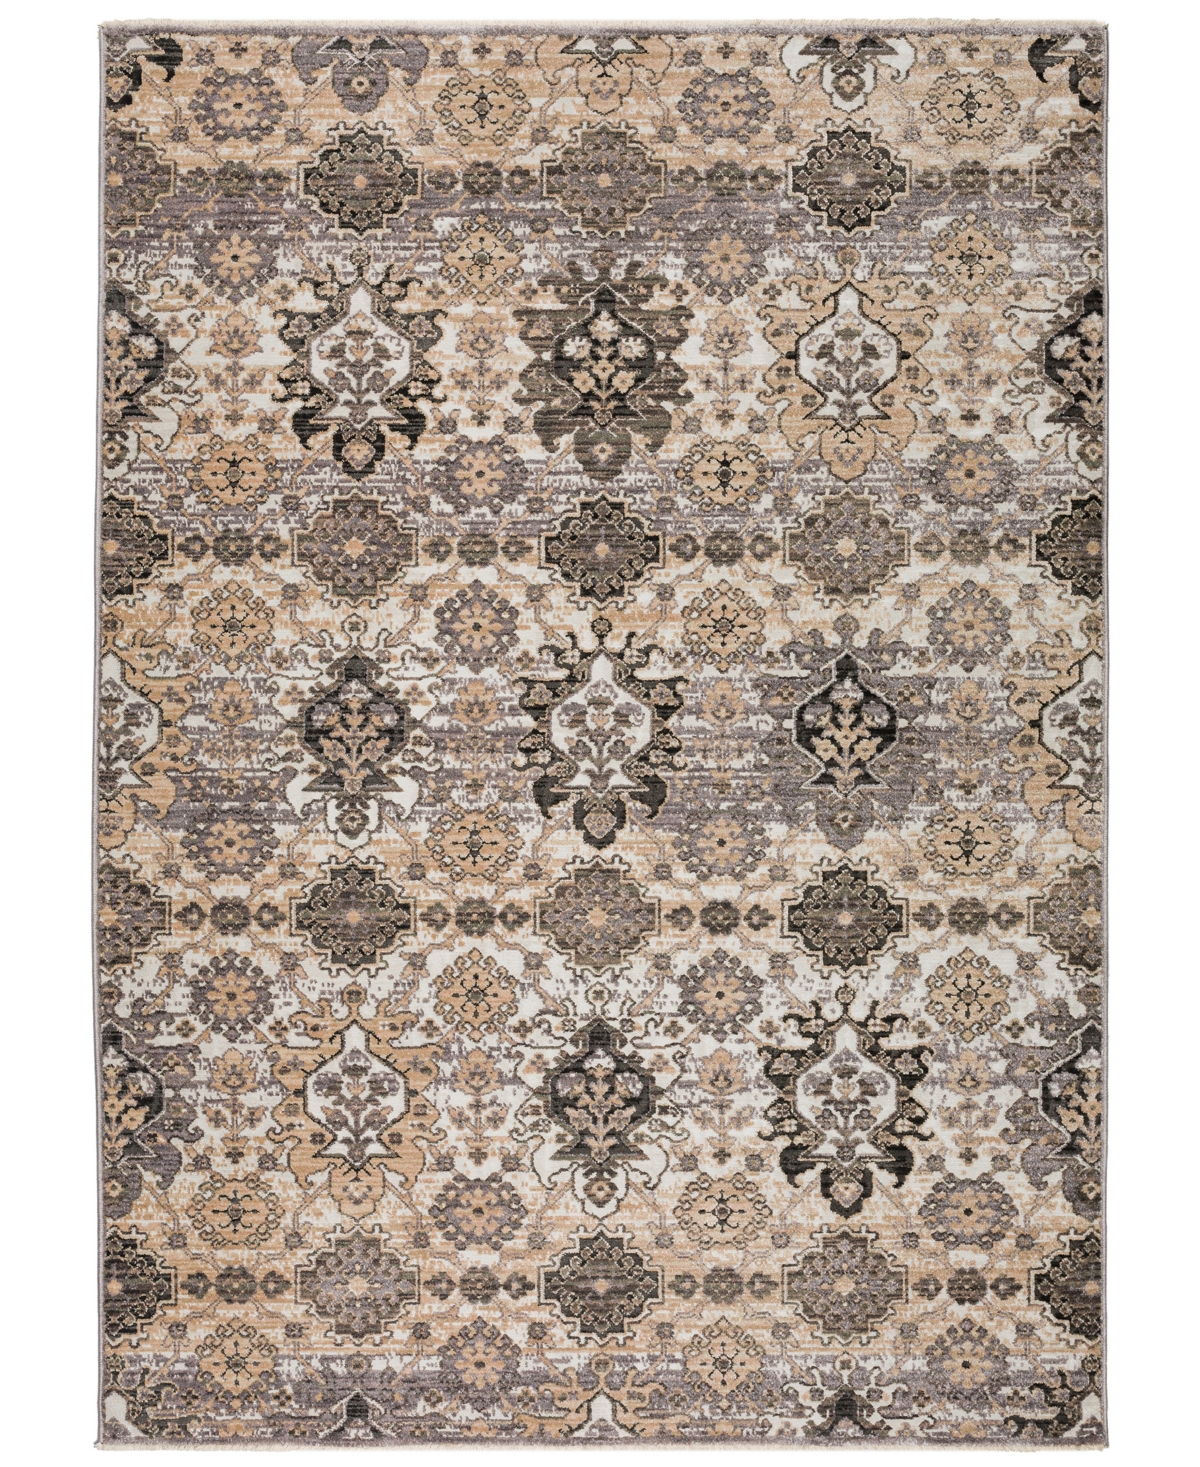 D Style Sergey Sgy7 7'10" X 10' Area Rug In Gray